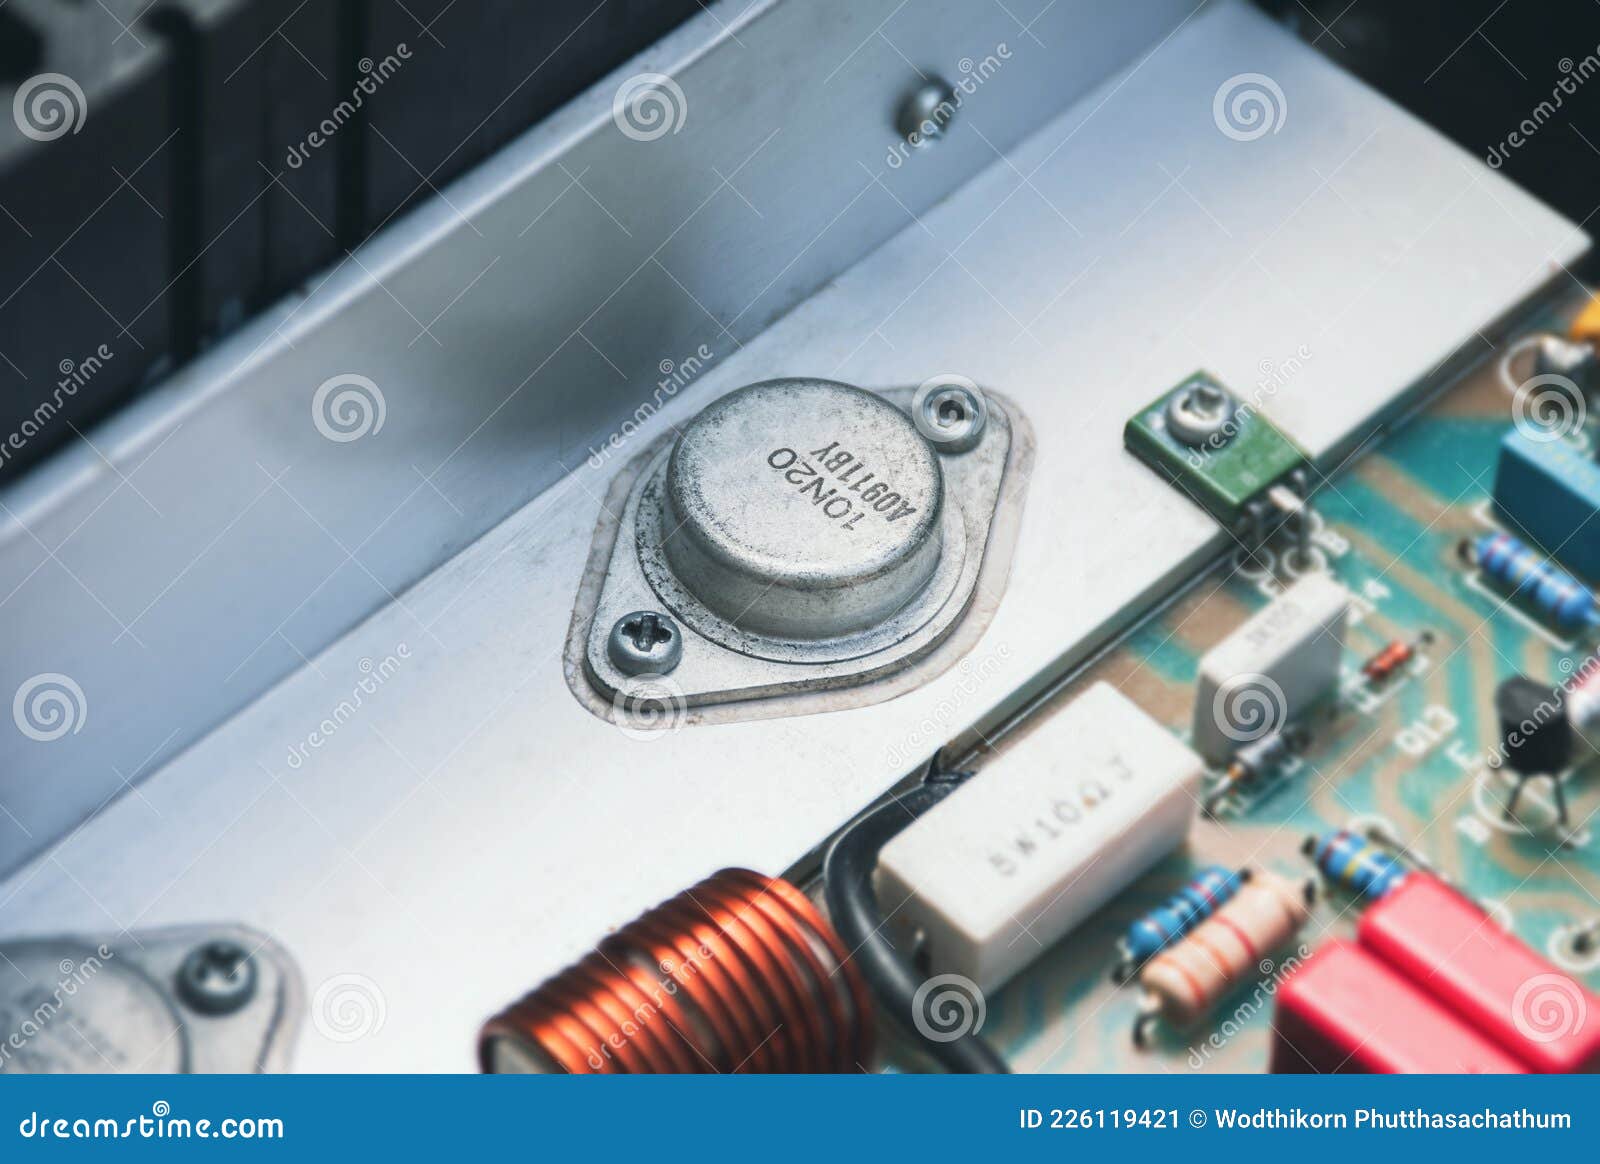 183 Mosfet Stock Photos - Free & Royalty-Free Stock Photos from Dreamstime